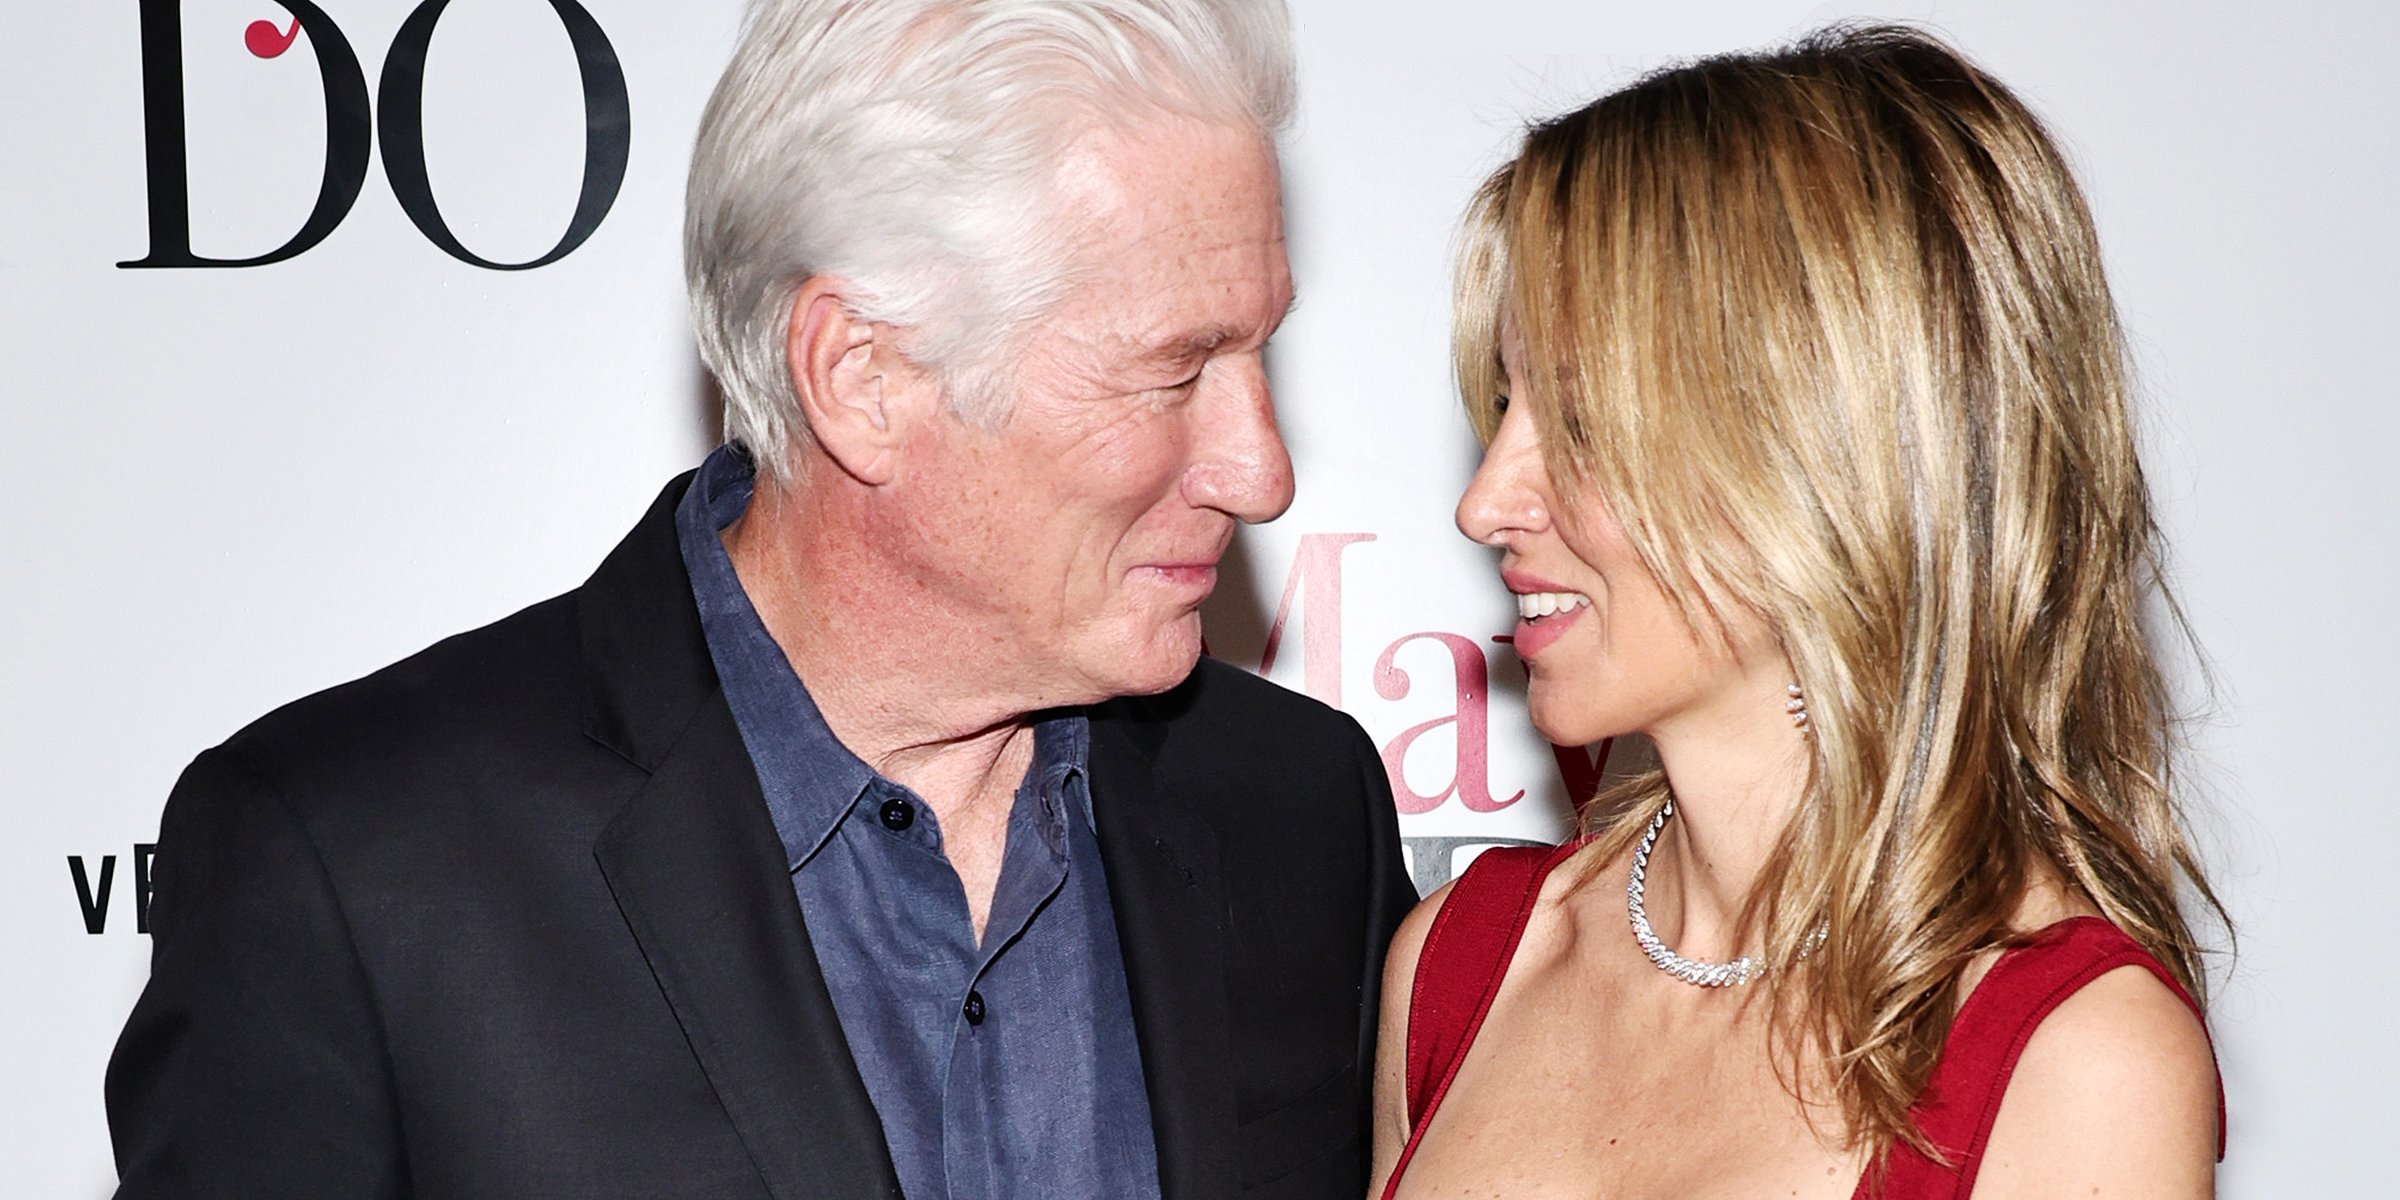 Richard Gere and Alejandra Silva, 2022 | Source: Getty Images